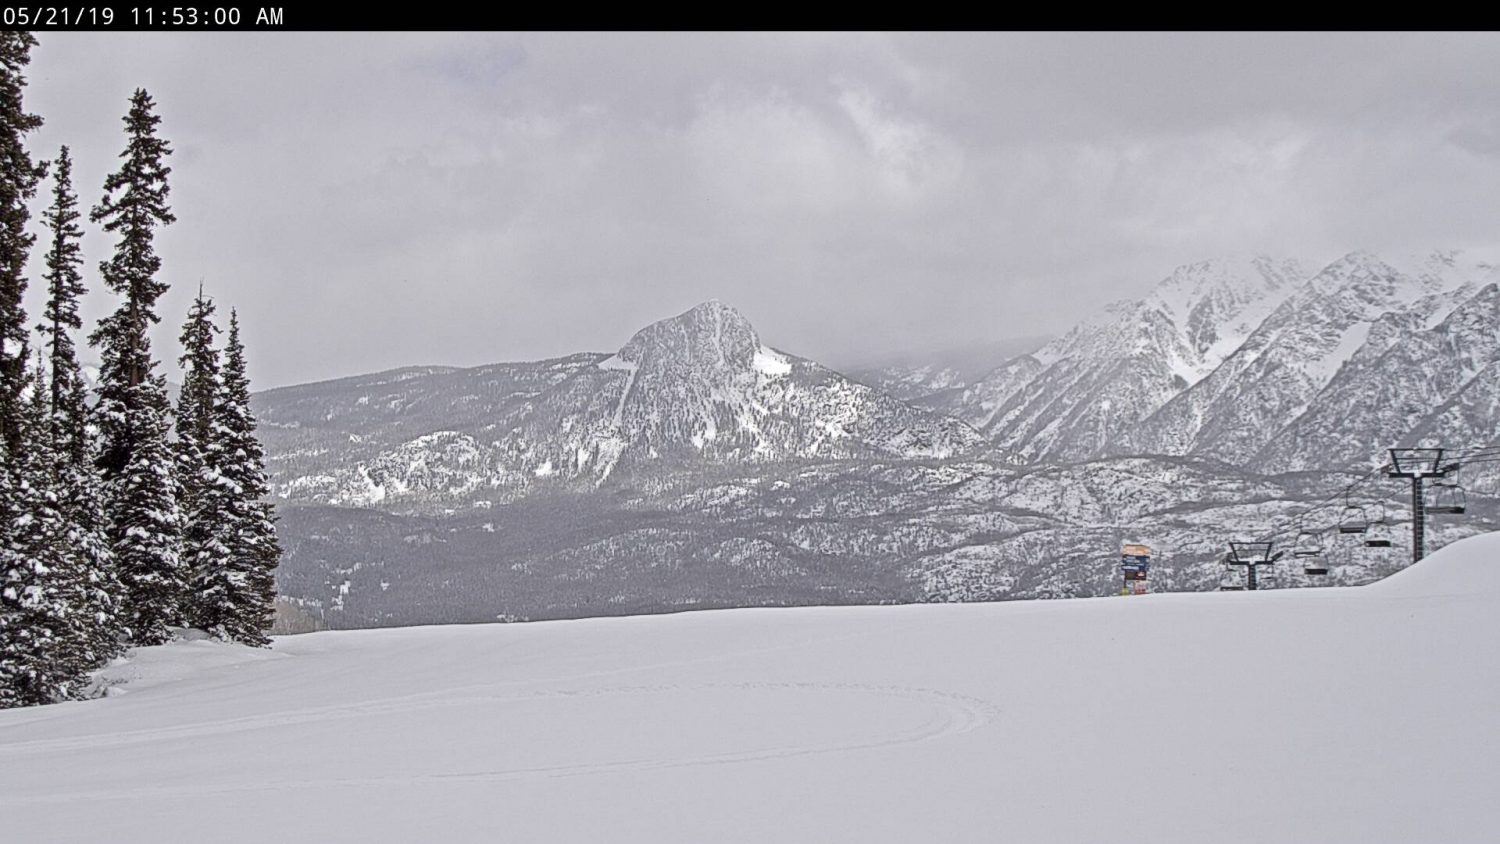 Purgatory summit webcam - 21st May 2019. PURGATORY Re-Opens for Memorial Day Weekend for the First Time Ever!